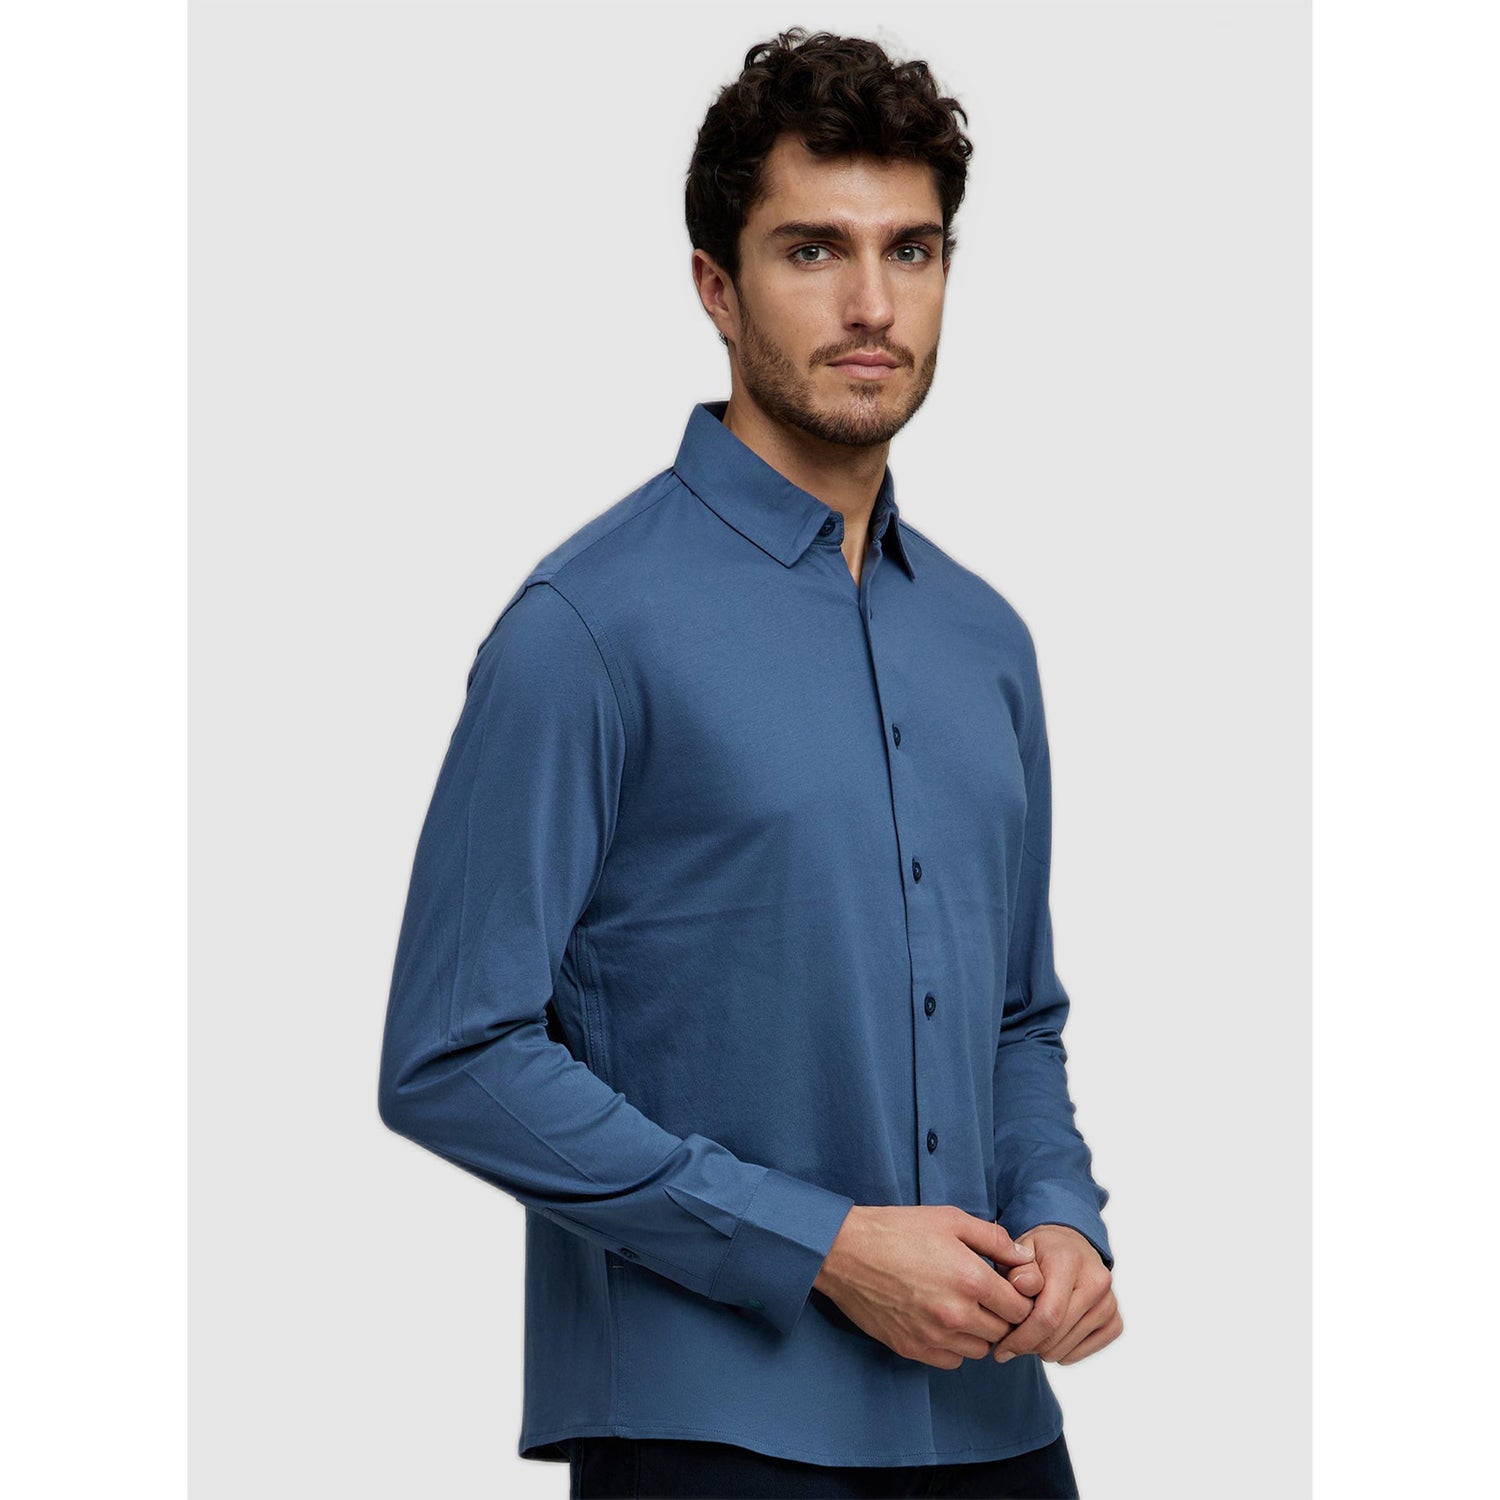 Men's Blue Solid Casual Shirts (Various Sizes)